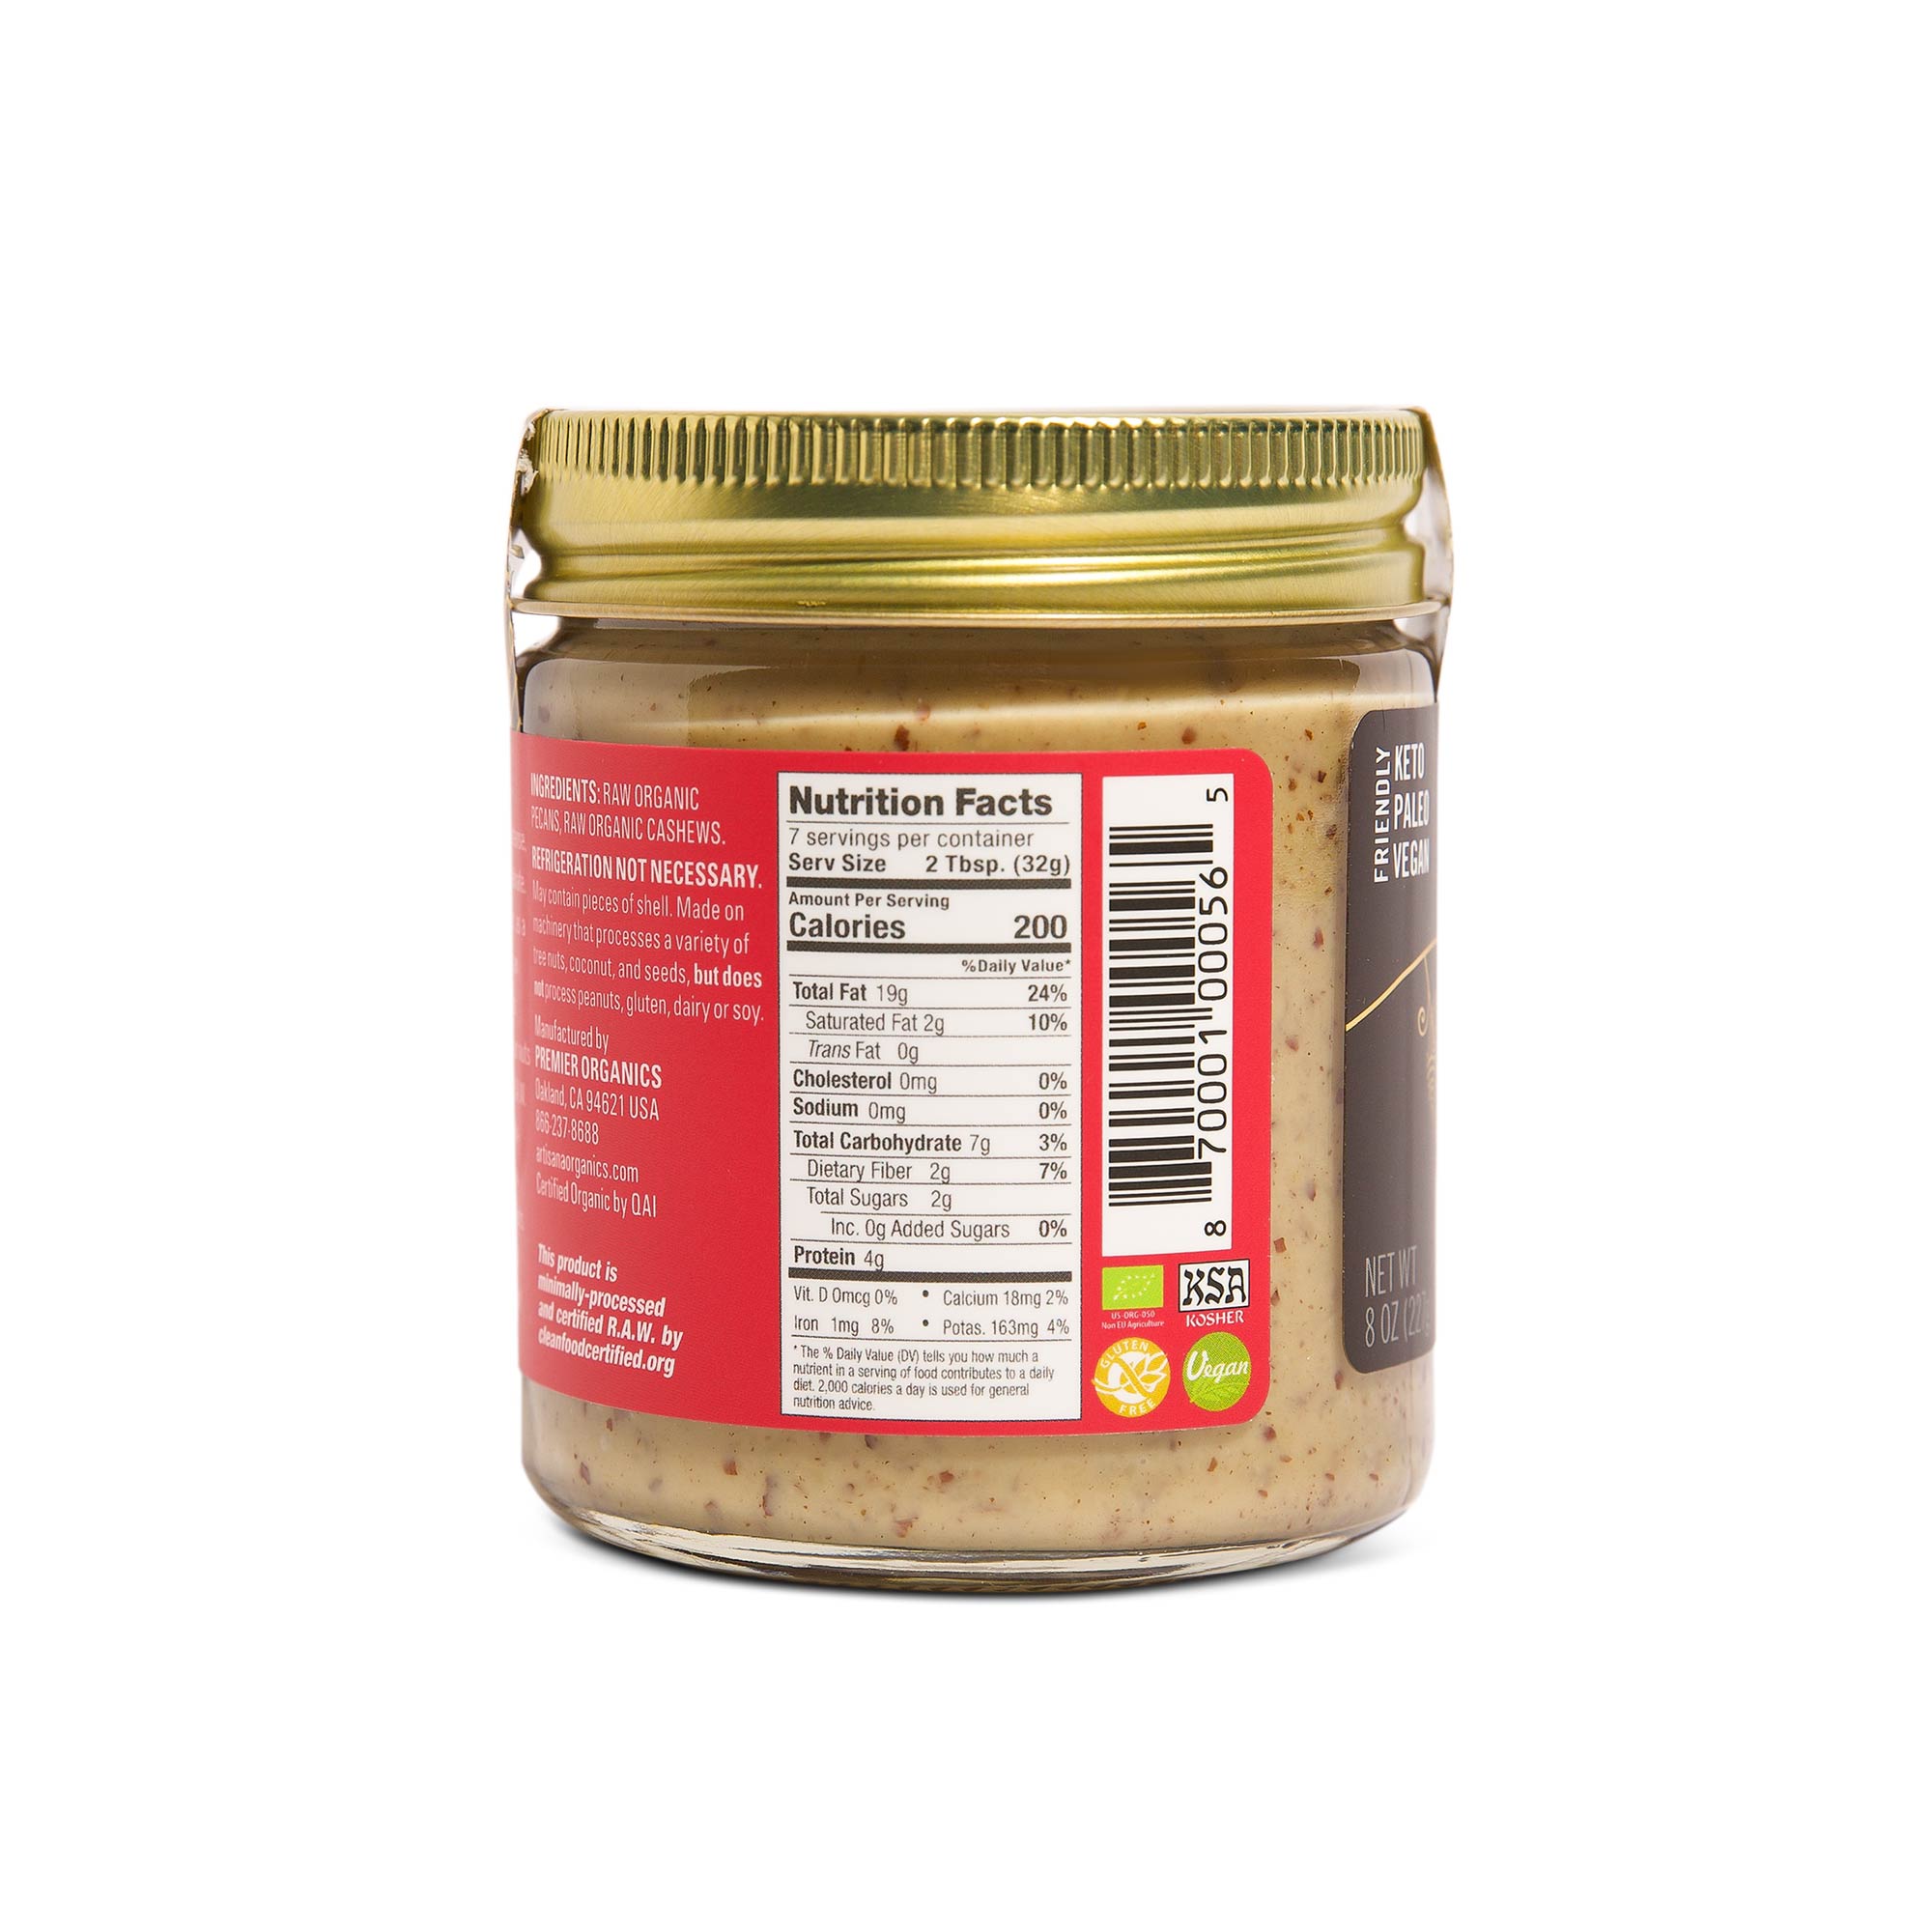 Artisana Raw Pecan Butter with Cashew Nutrition Facts 8oz jar